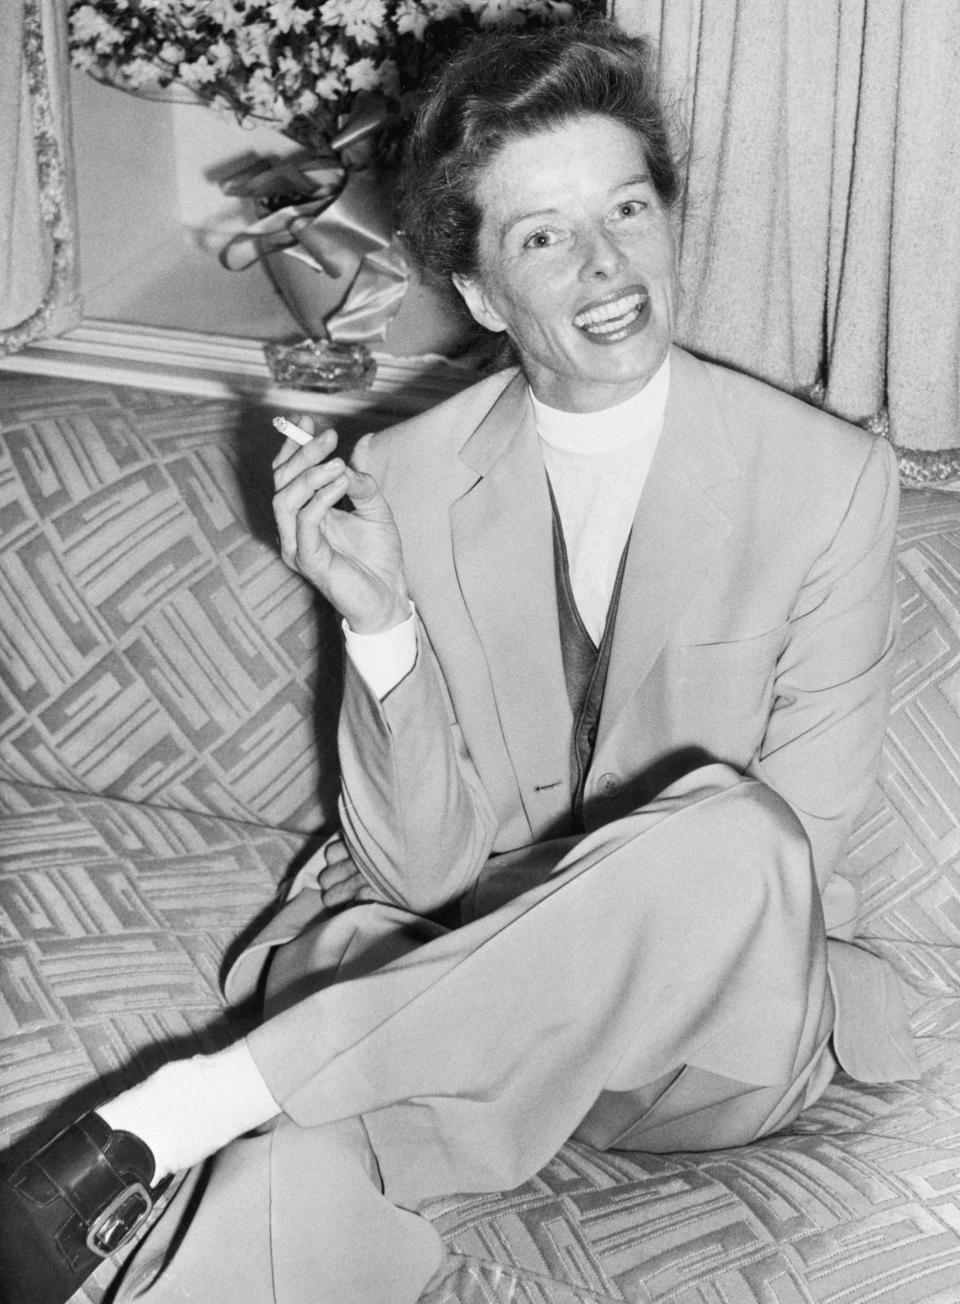 Hepburn wears a suit for a press conference in 1952.